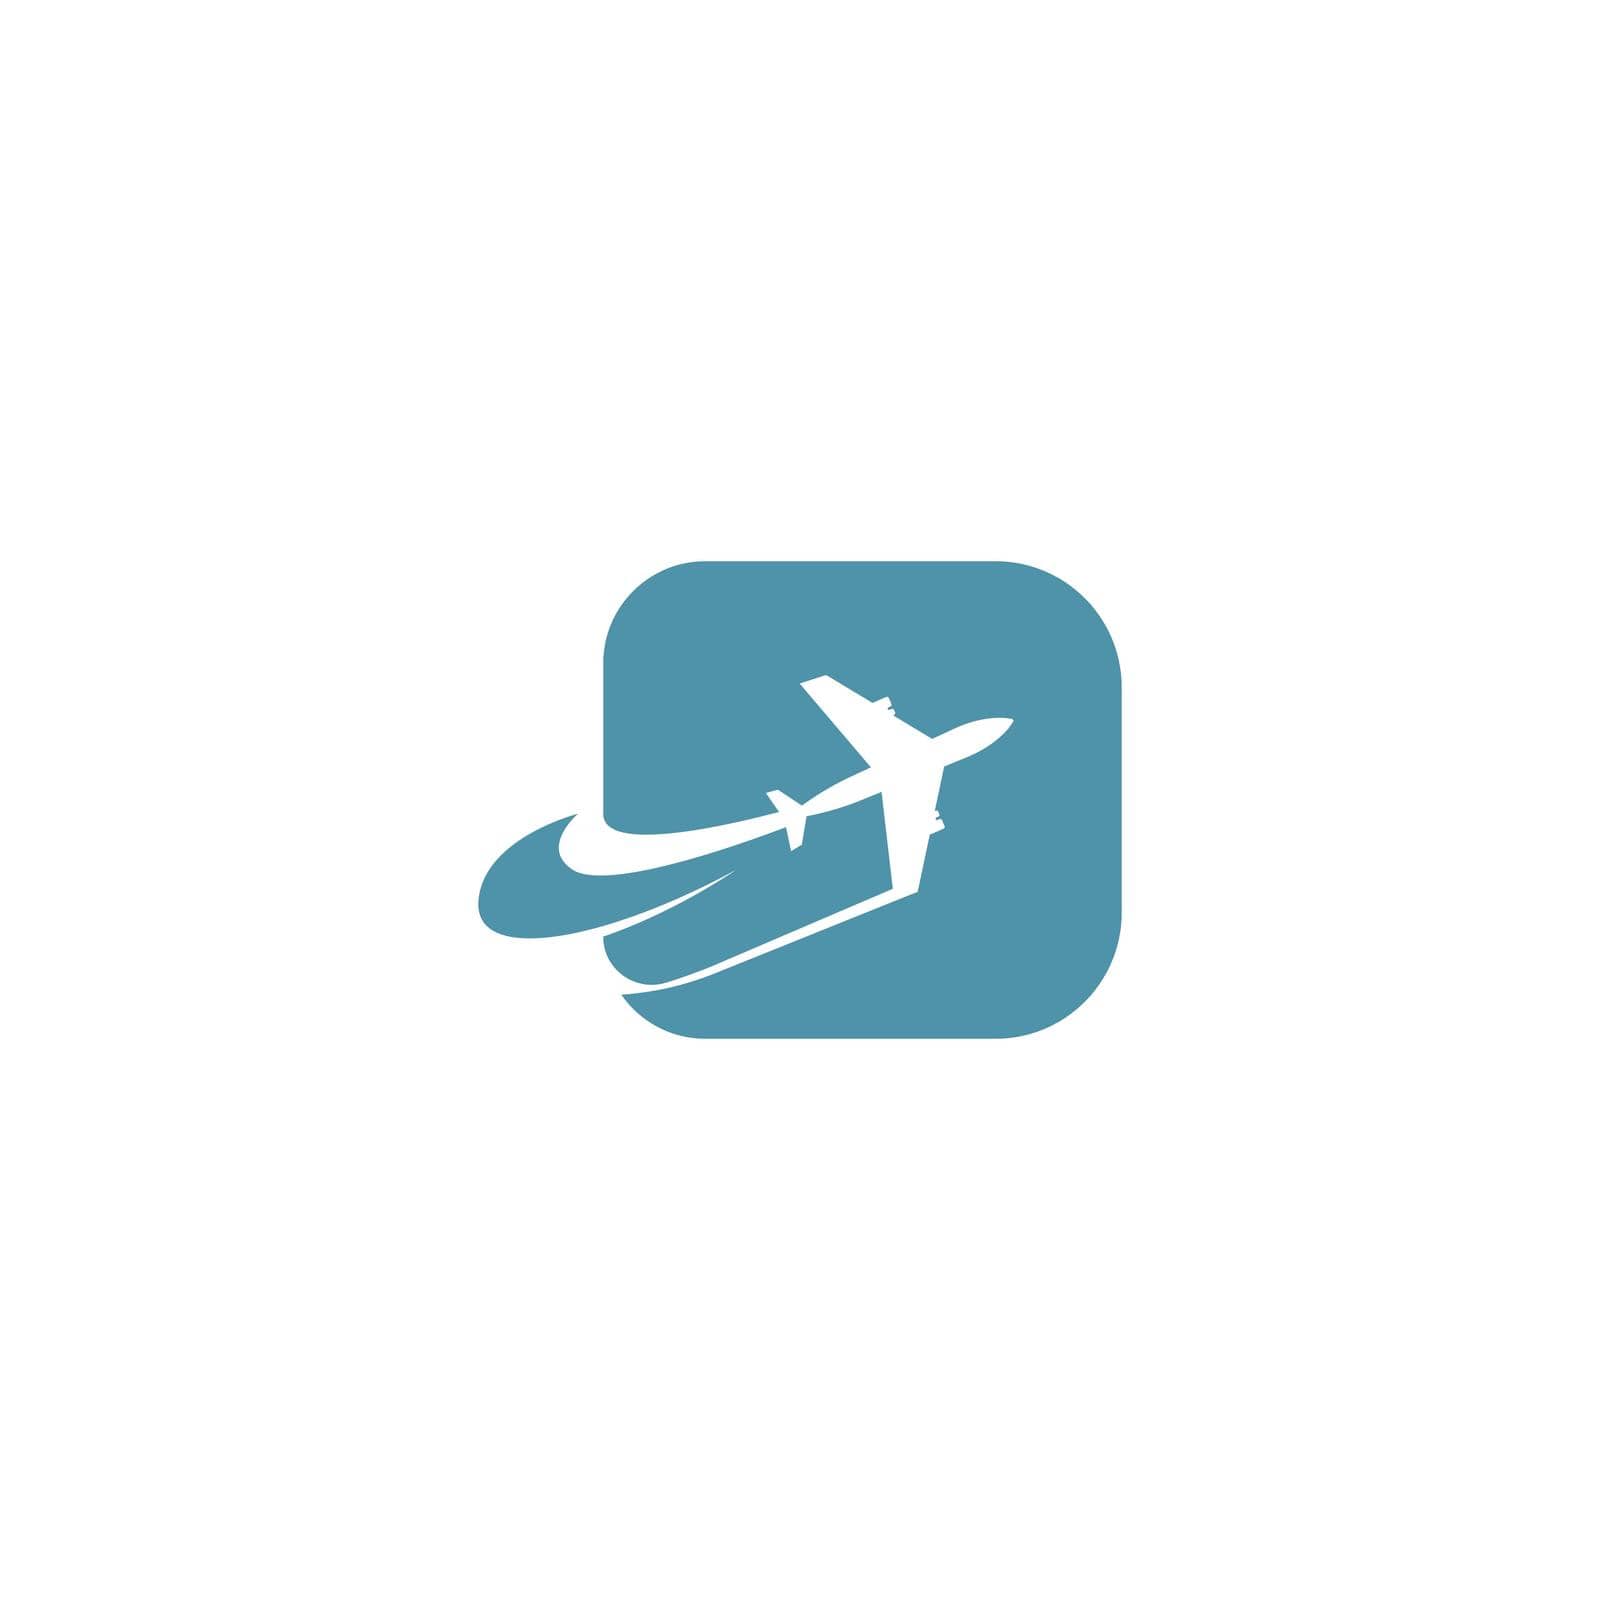 Plane icon logo design template vector by bellaxbudhong3